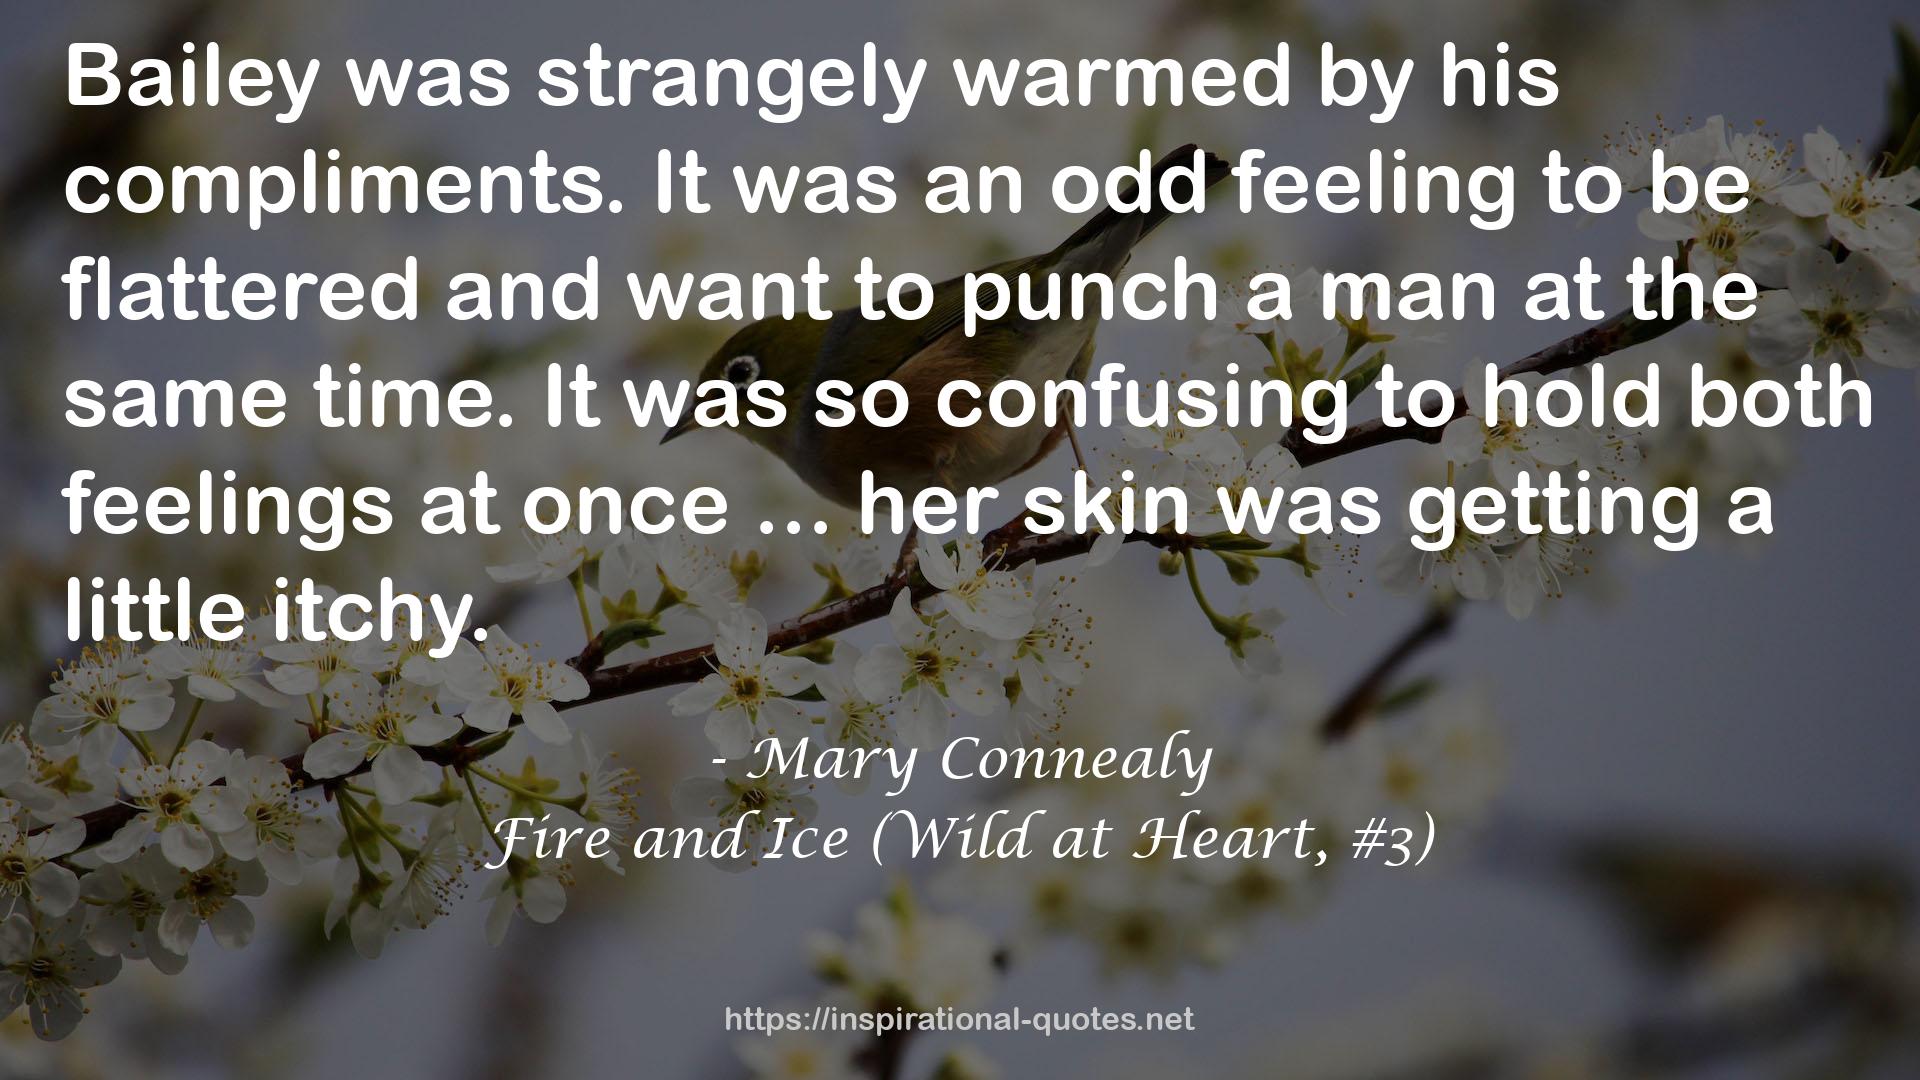 Fire and Ice (Wild at Heart, #3) QUOTES